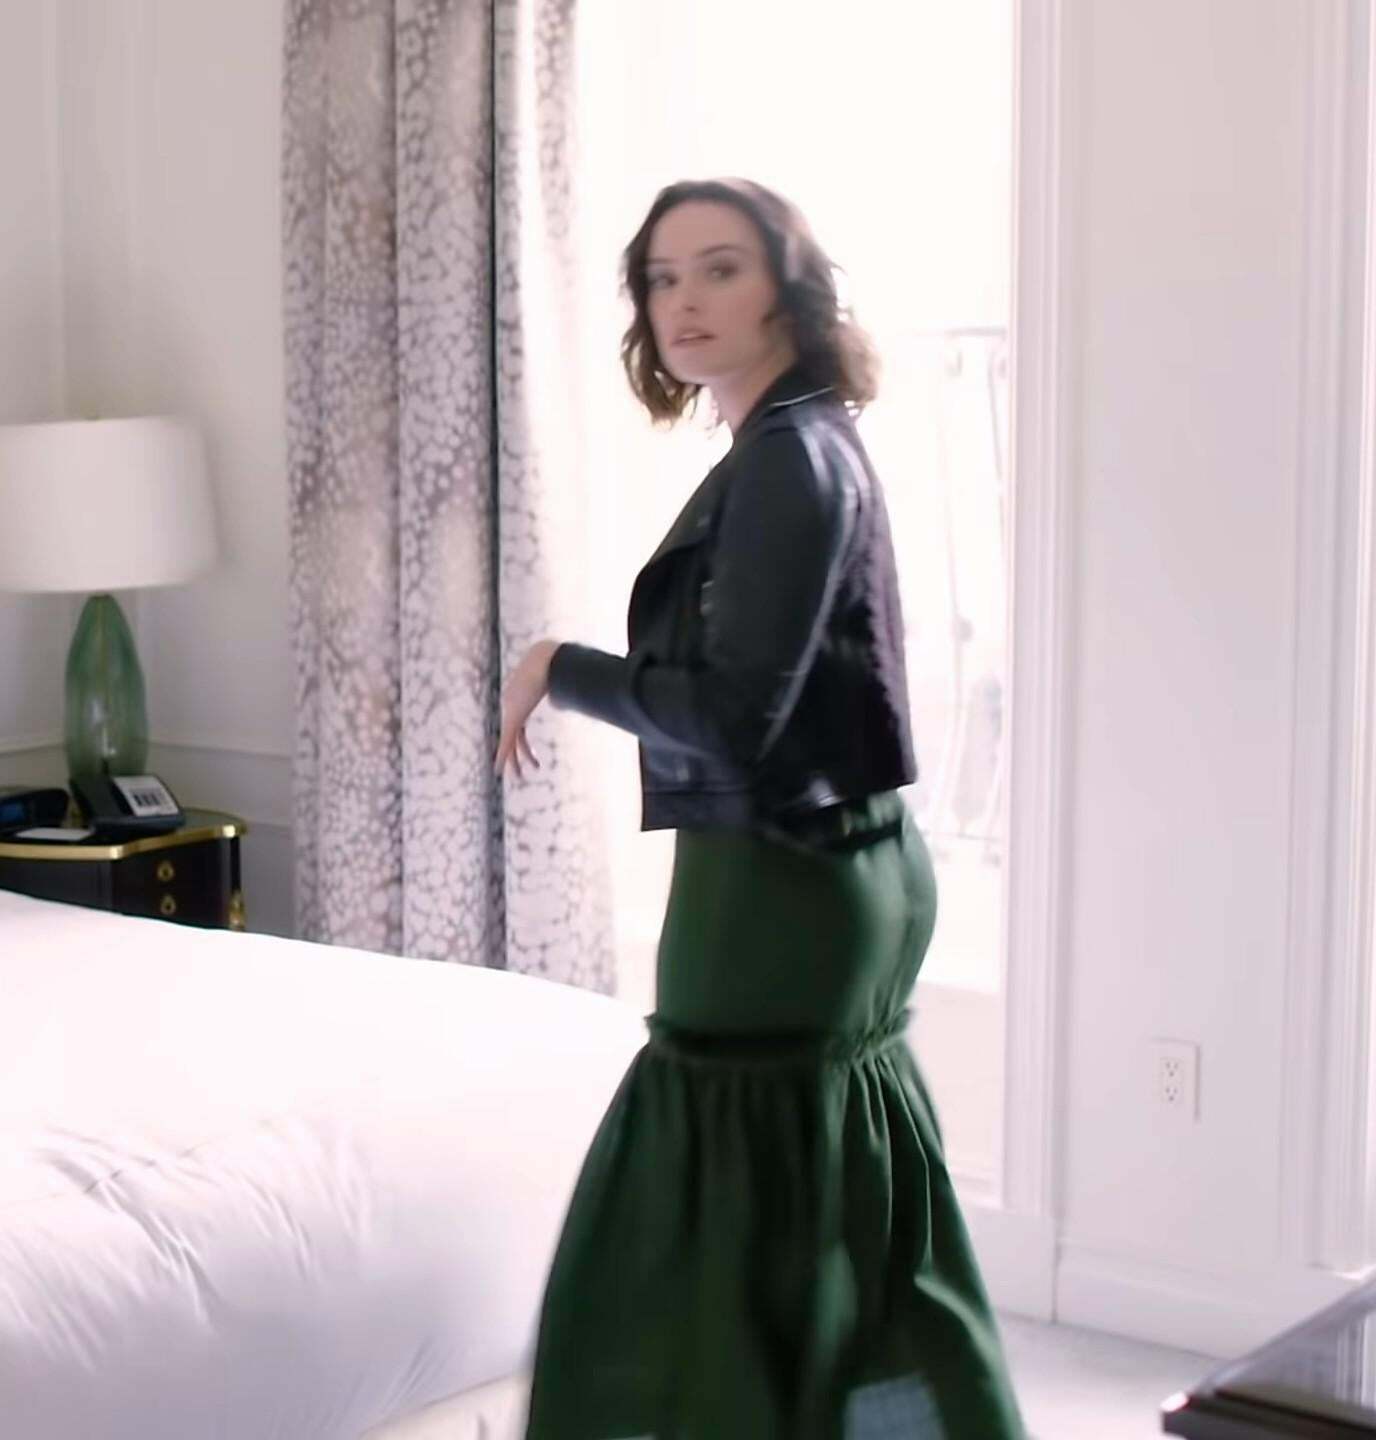 Id shove Daisy Ridley on that bed and just go